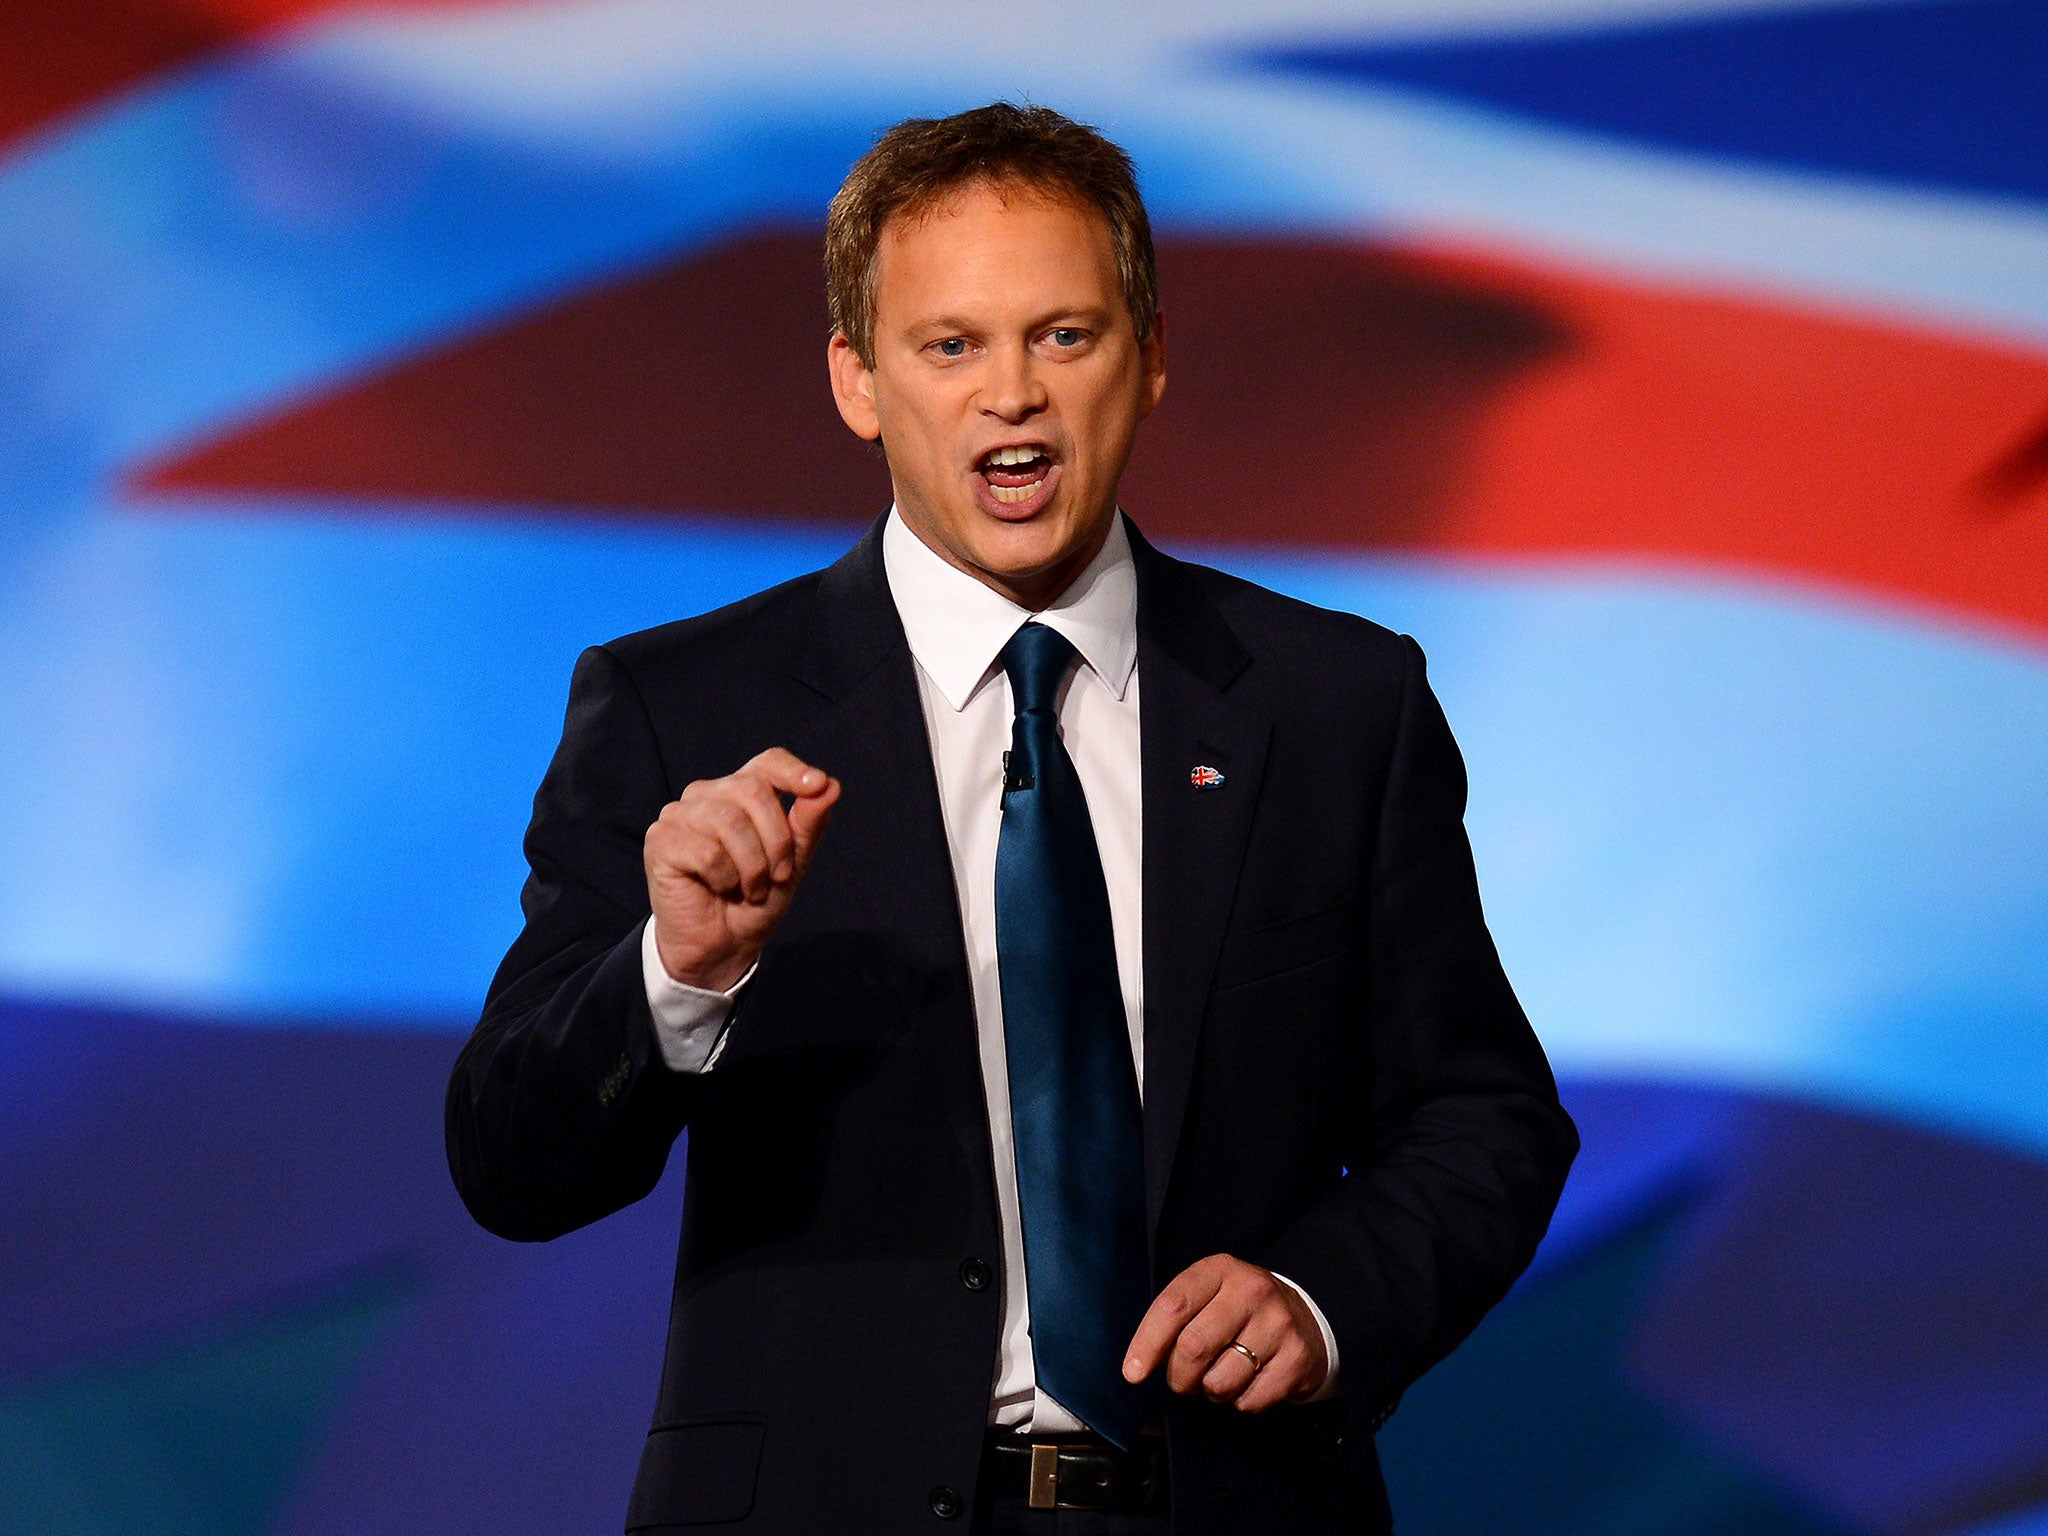 Co-Chairman of the Conservative Party Grant Shapps gestures as he speaks during the opening day of the annual Conservative Party Conference at the ICC in Birmingham, central England on October 7, 2012.